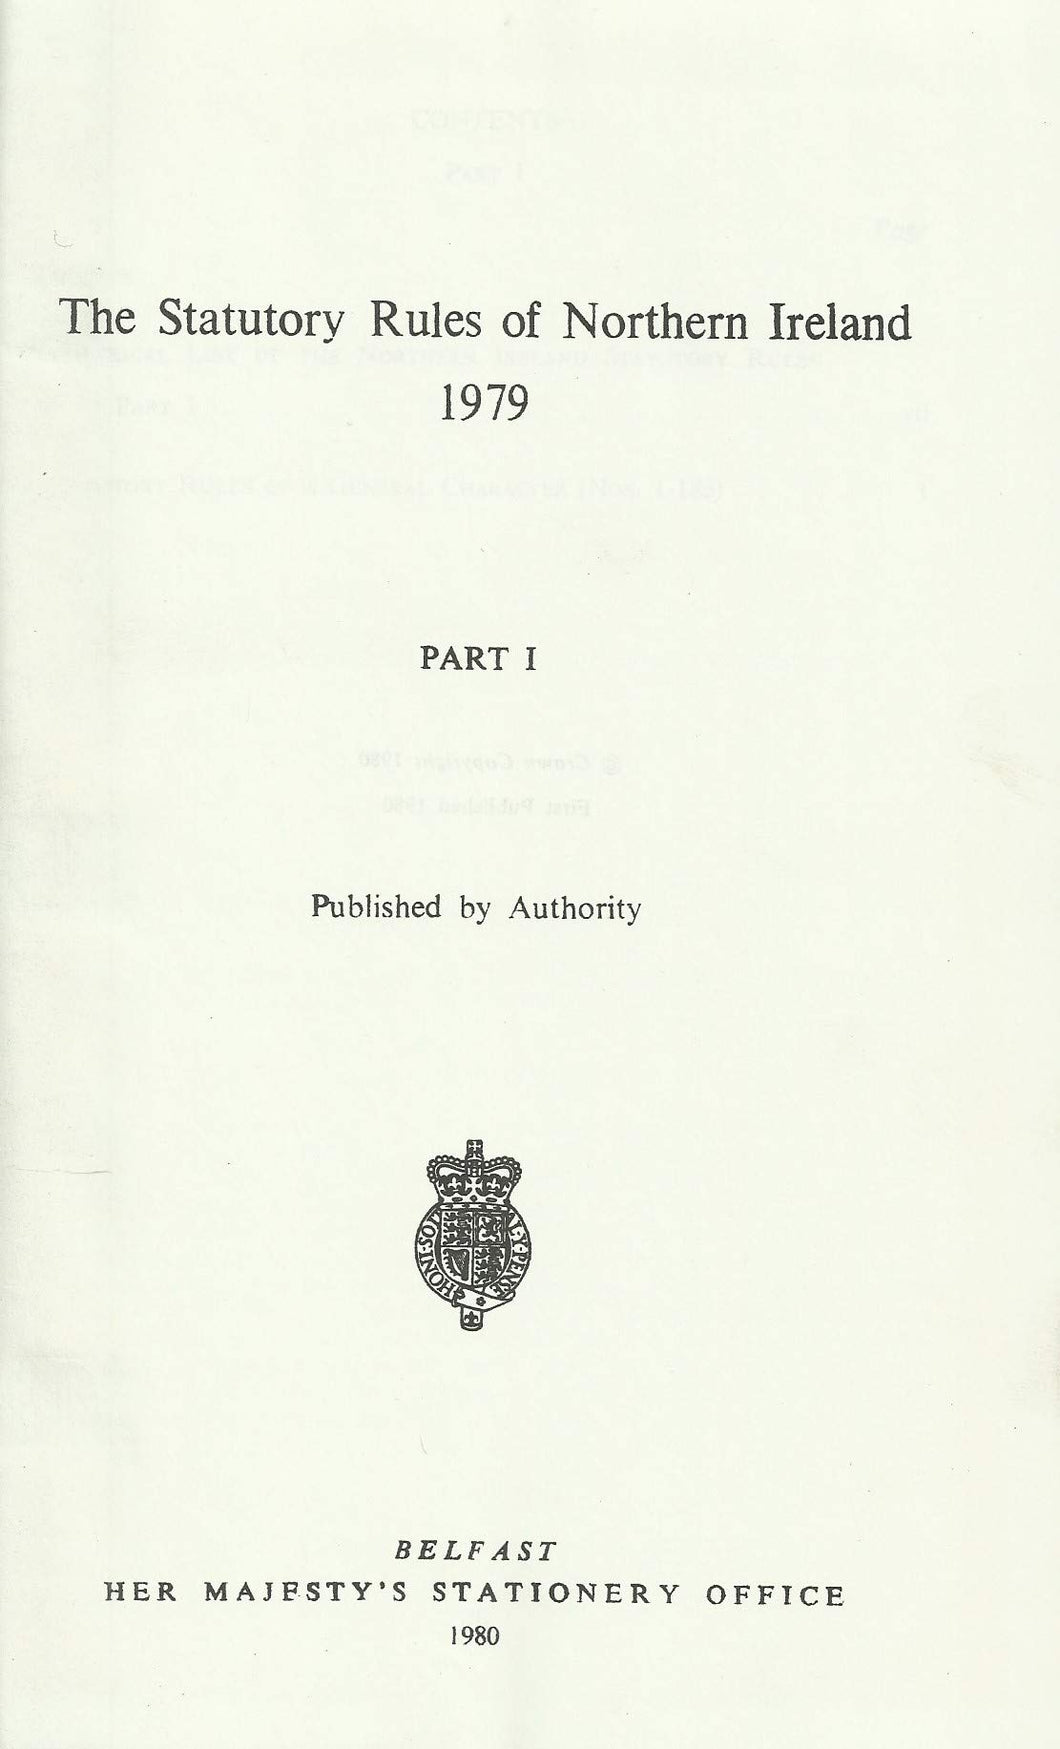 The Statutory Rules of Northern Ireland: 1979 Part 1 nos